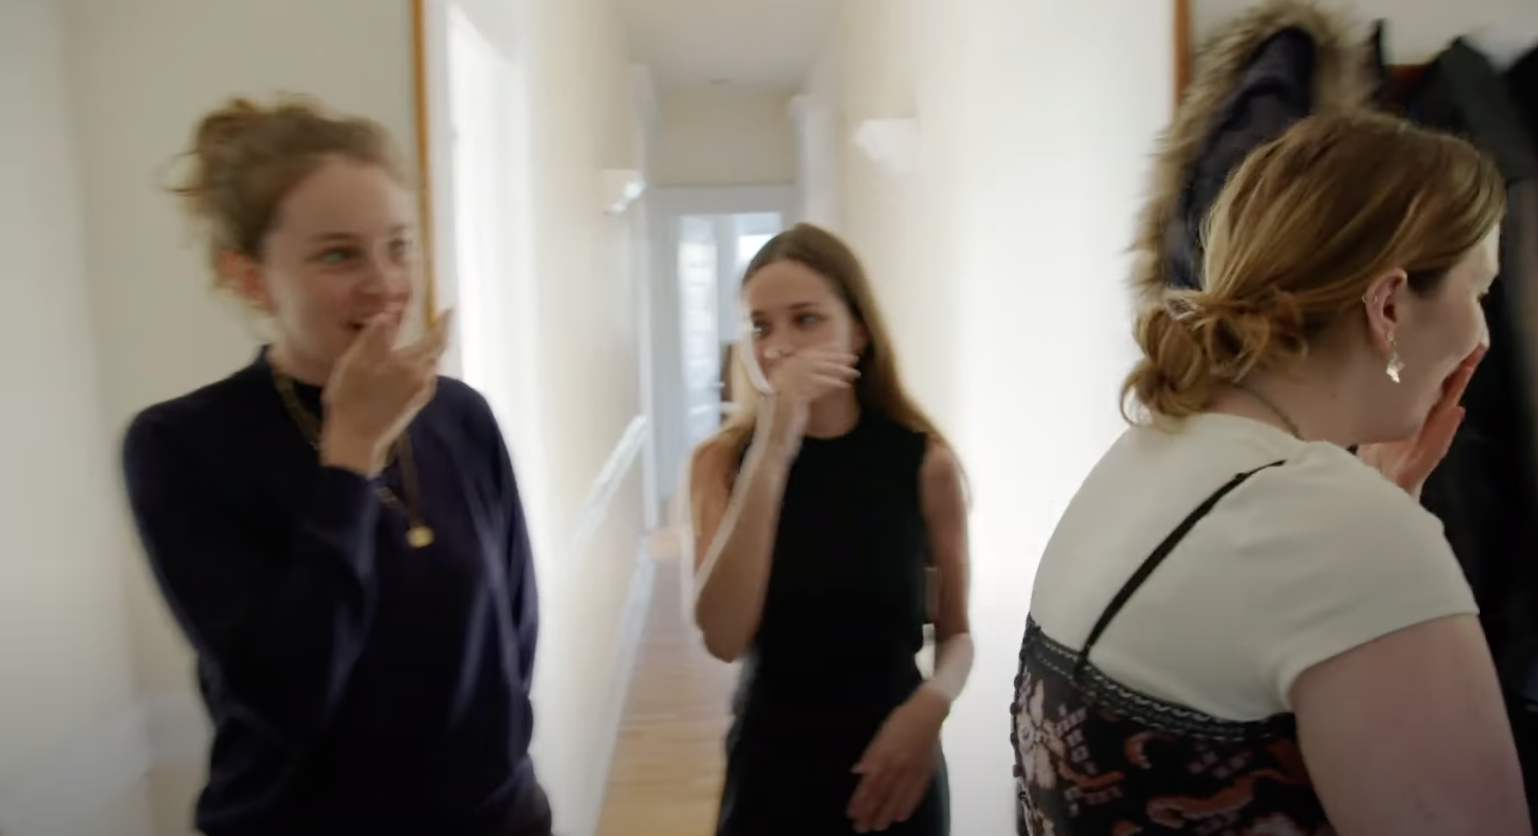 Three women stand inside their apartment, looking anxious